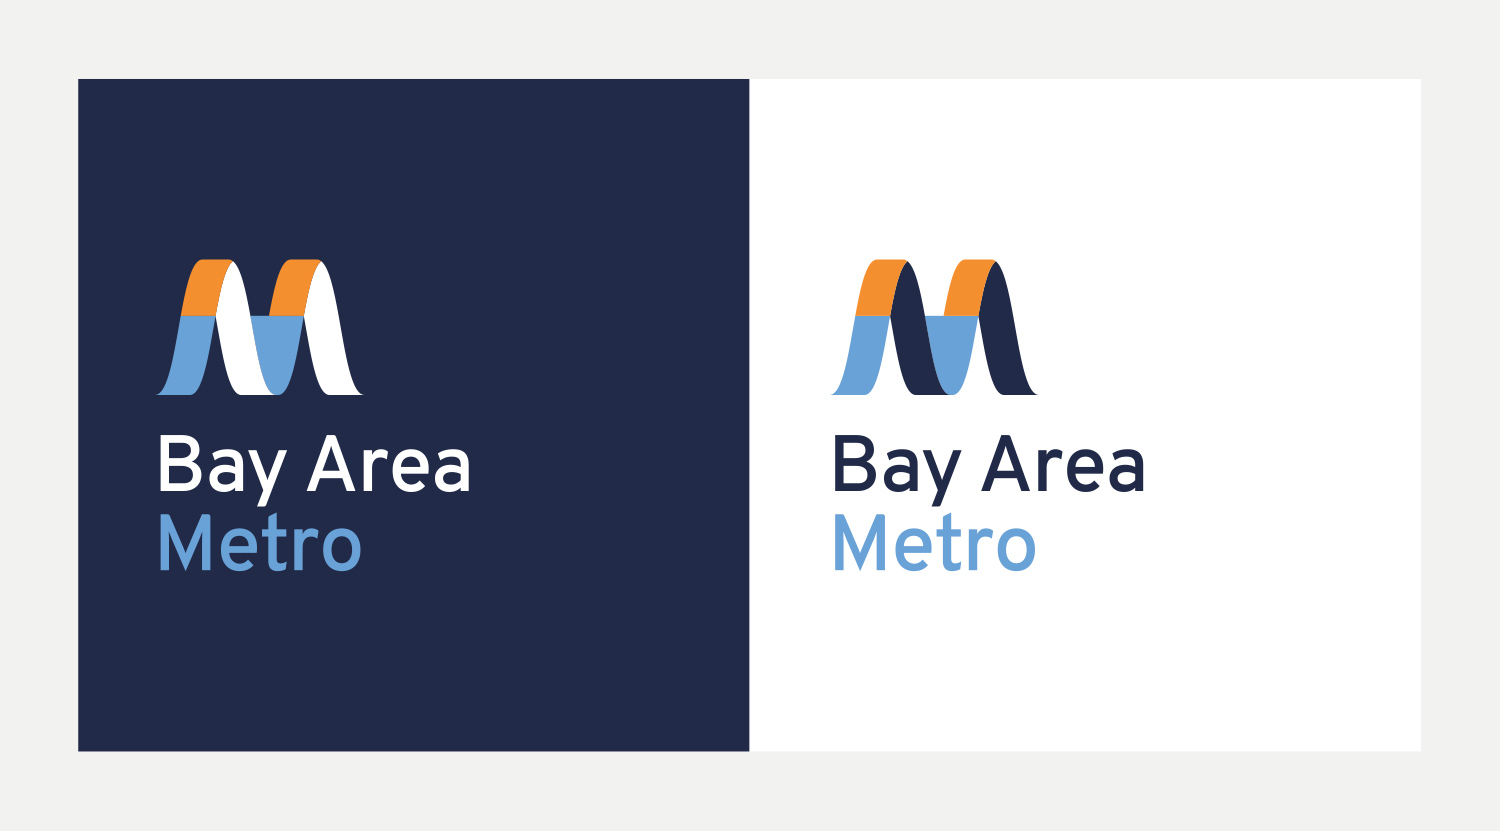 Bay Area Metro logos - designed by Liz Broekhuyse for Seamless Bay Area. The logo features a swooping letter M which echoes the geography of the ocean, bay and mountains.